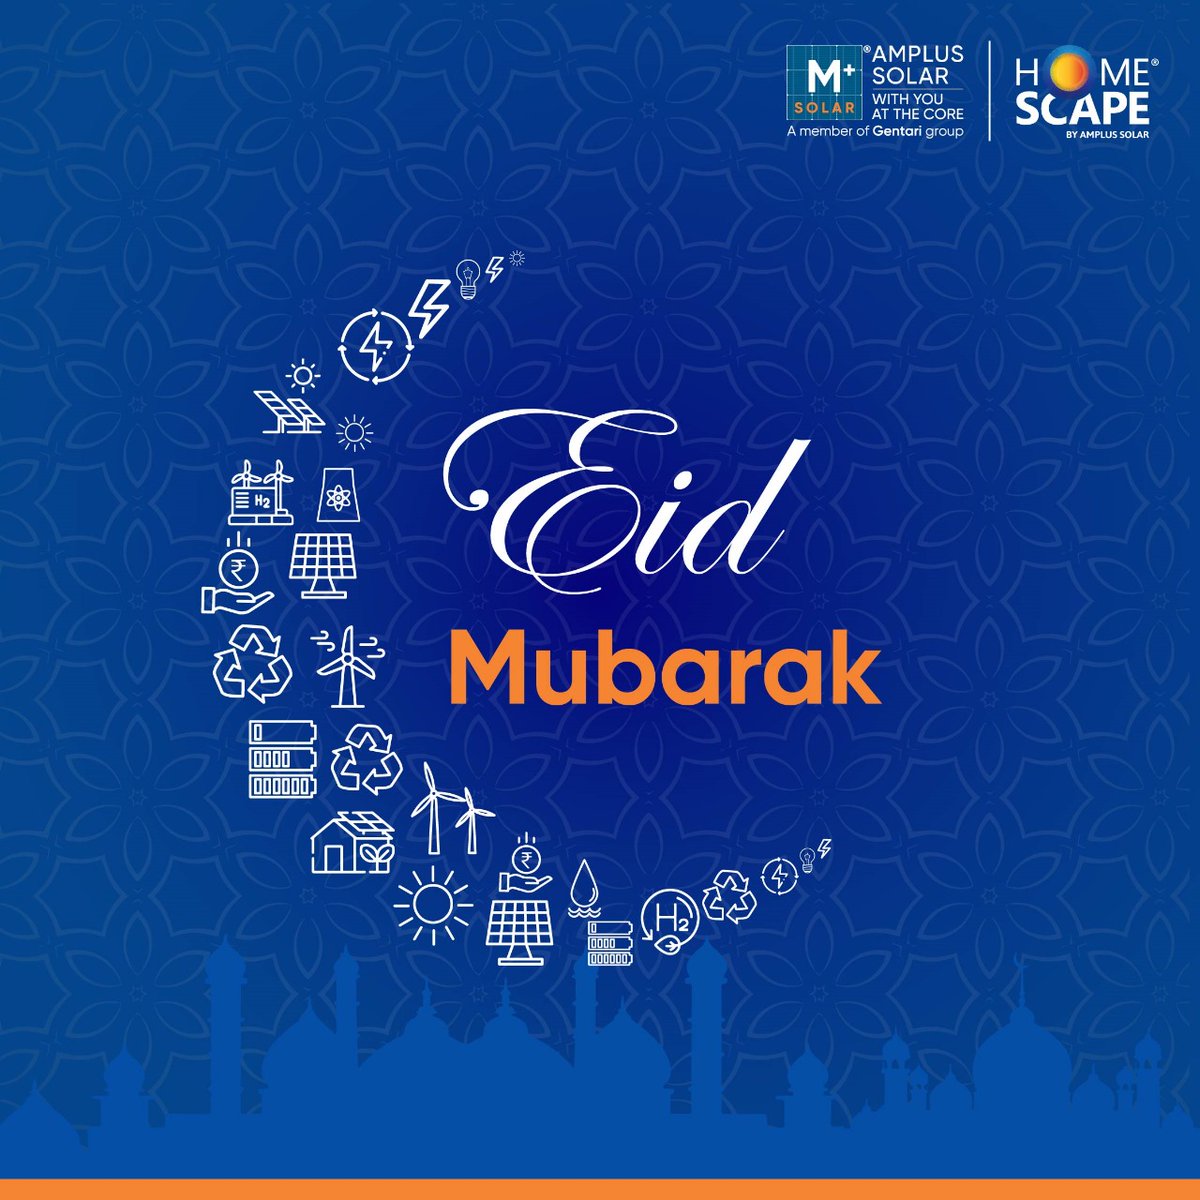 May the festive occasion of Eid be full of moments of happiness and joy for you and your family. Eid Mubarak! #Eid #Amplus #RenewableEnergy #CleanEnergy